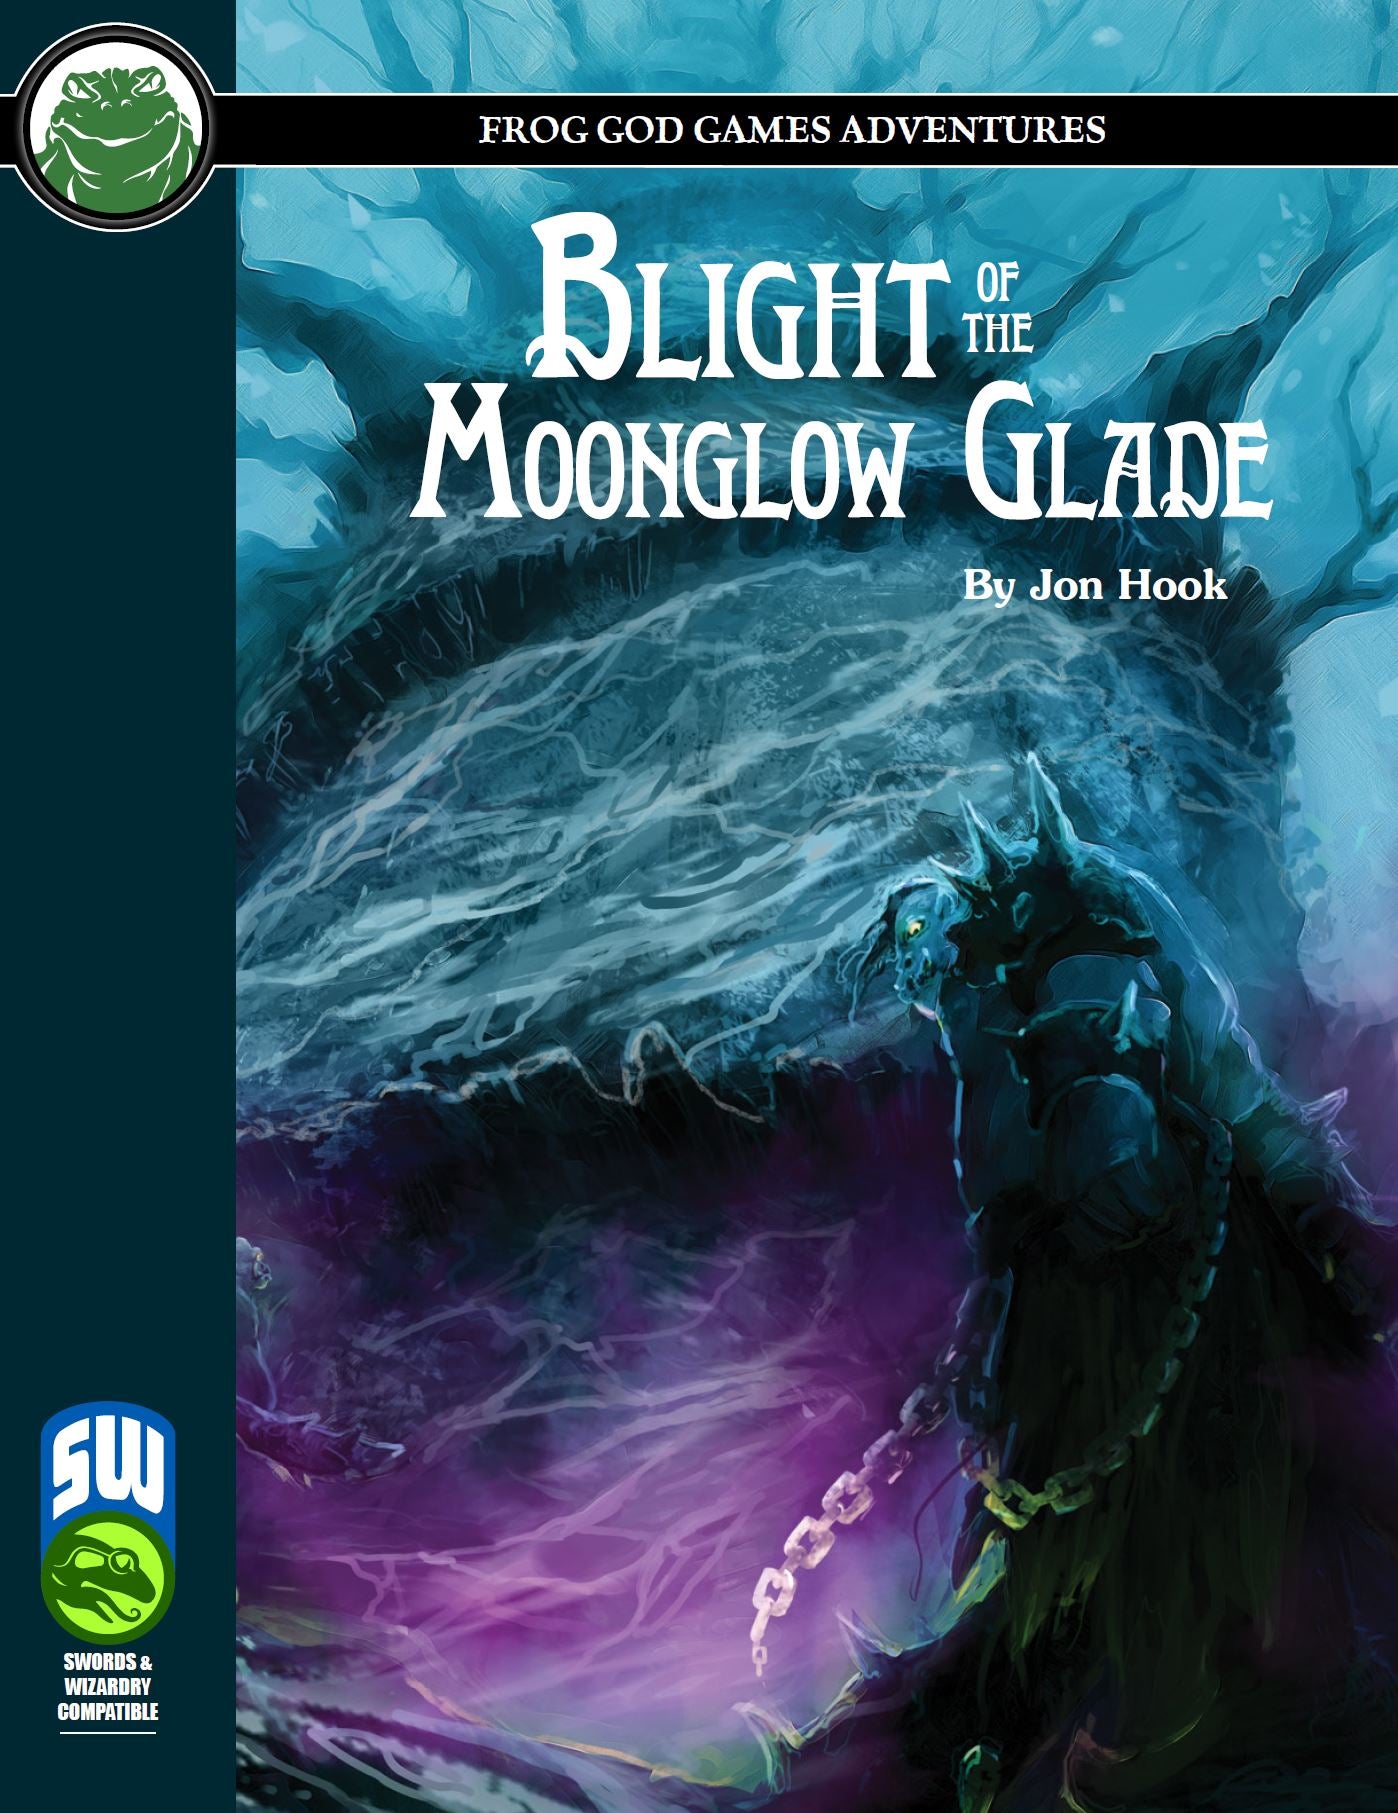 Blight of the Moonglow Glade